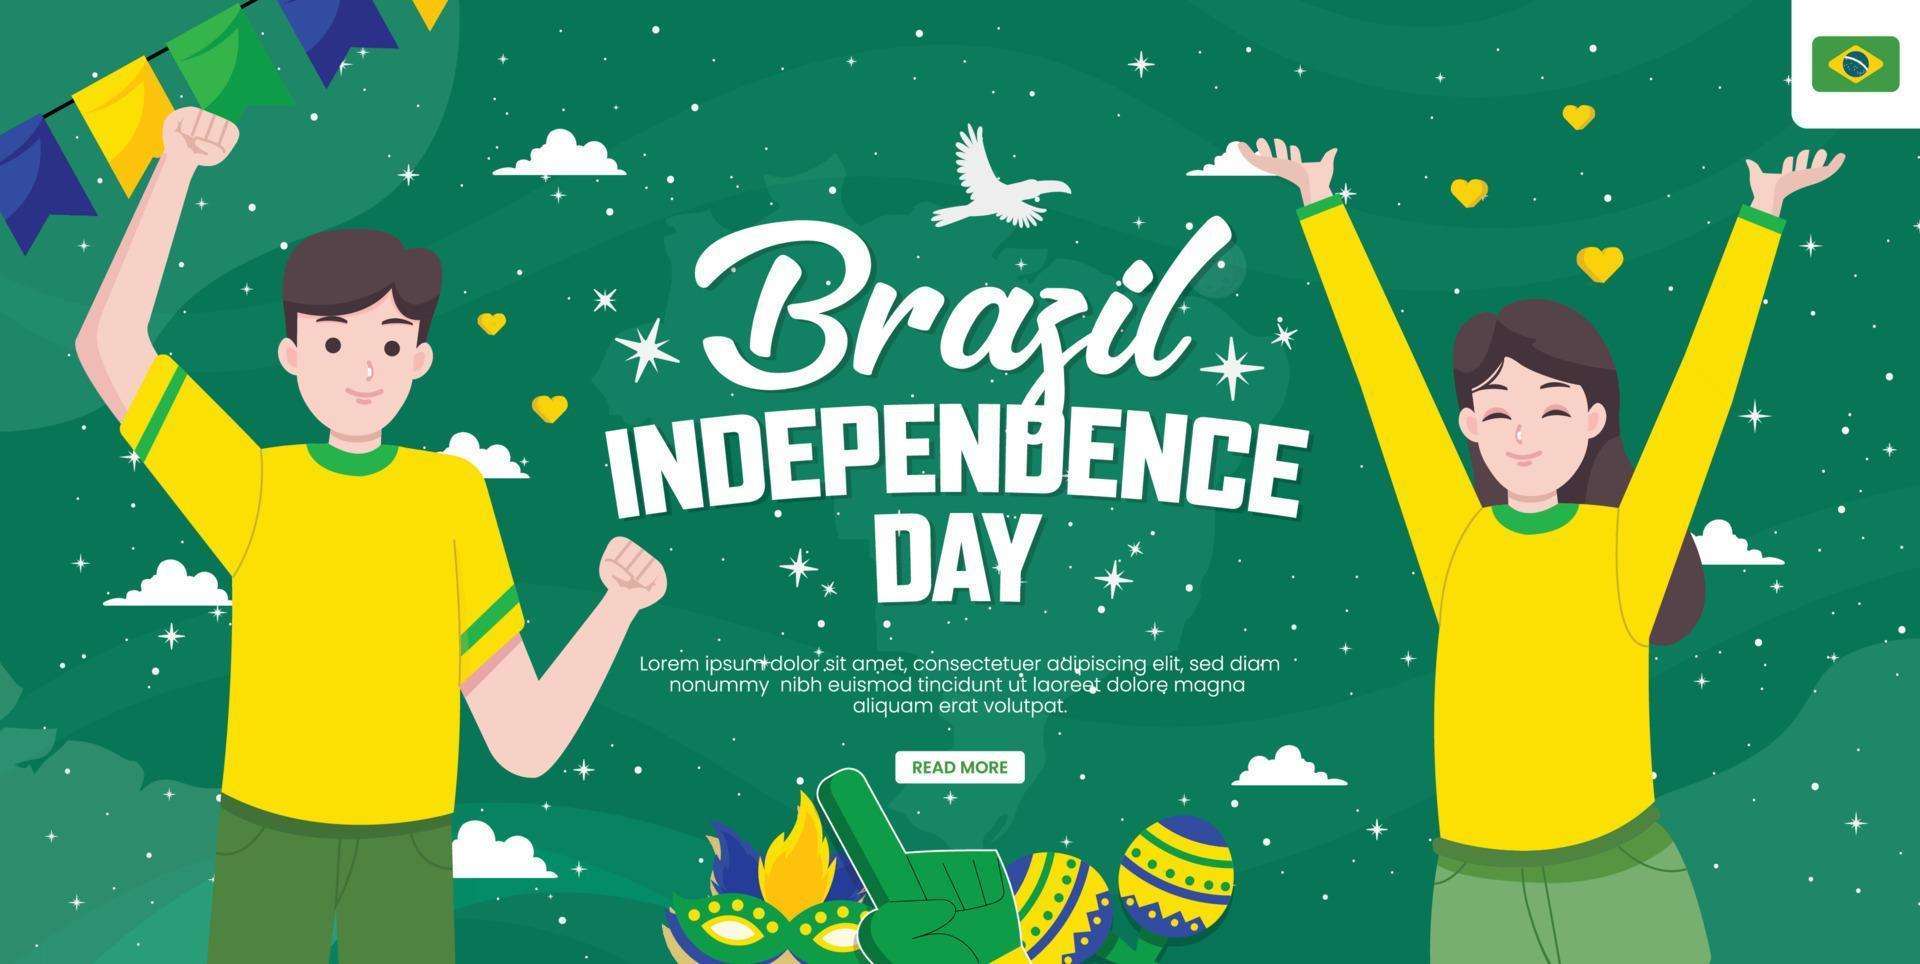 Brazil independence day concept illustration vector